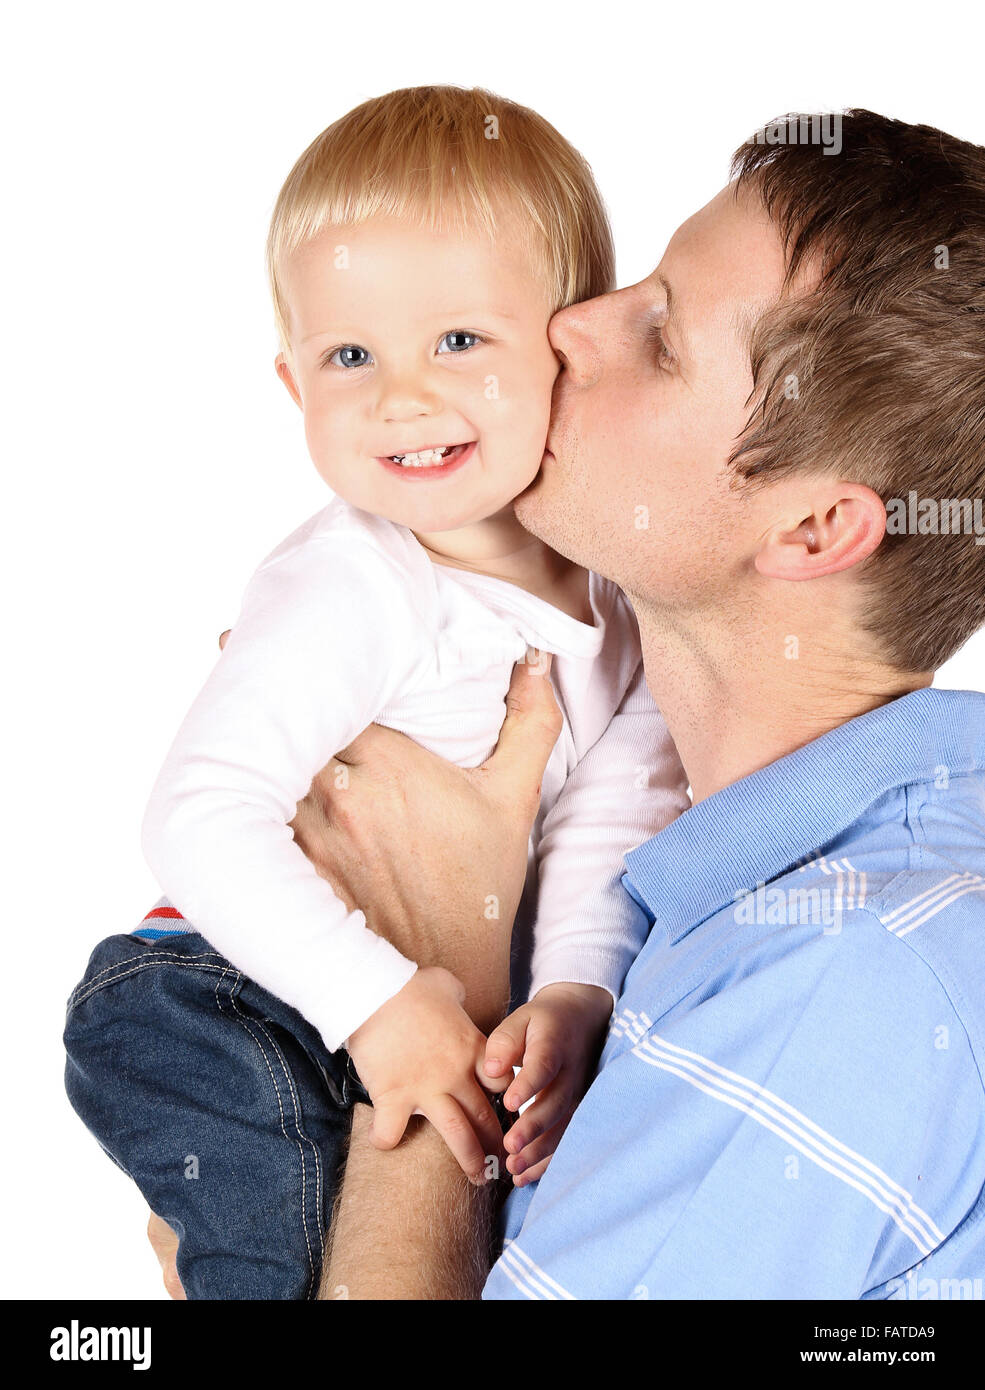 Happy caucasian dad holding and kissing his baby boy. Image is isolated on a white background. Stock Photo